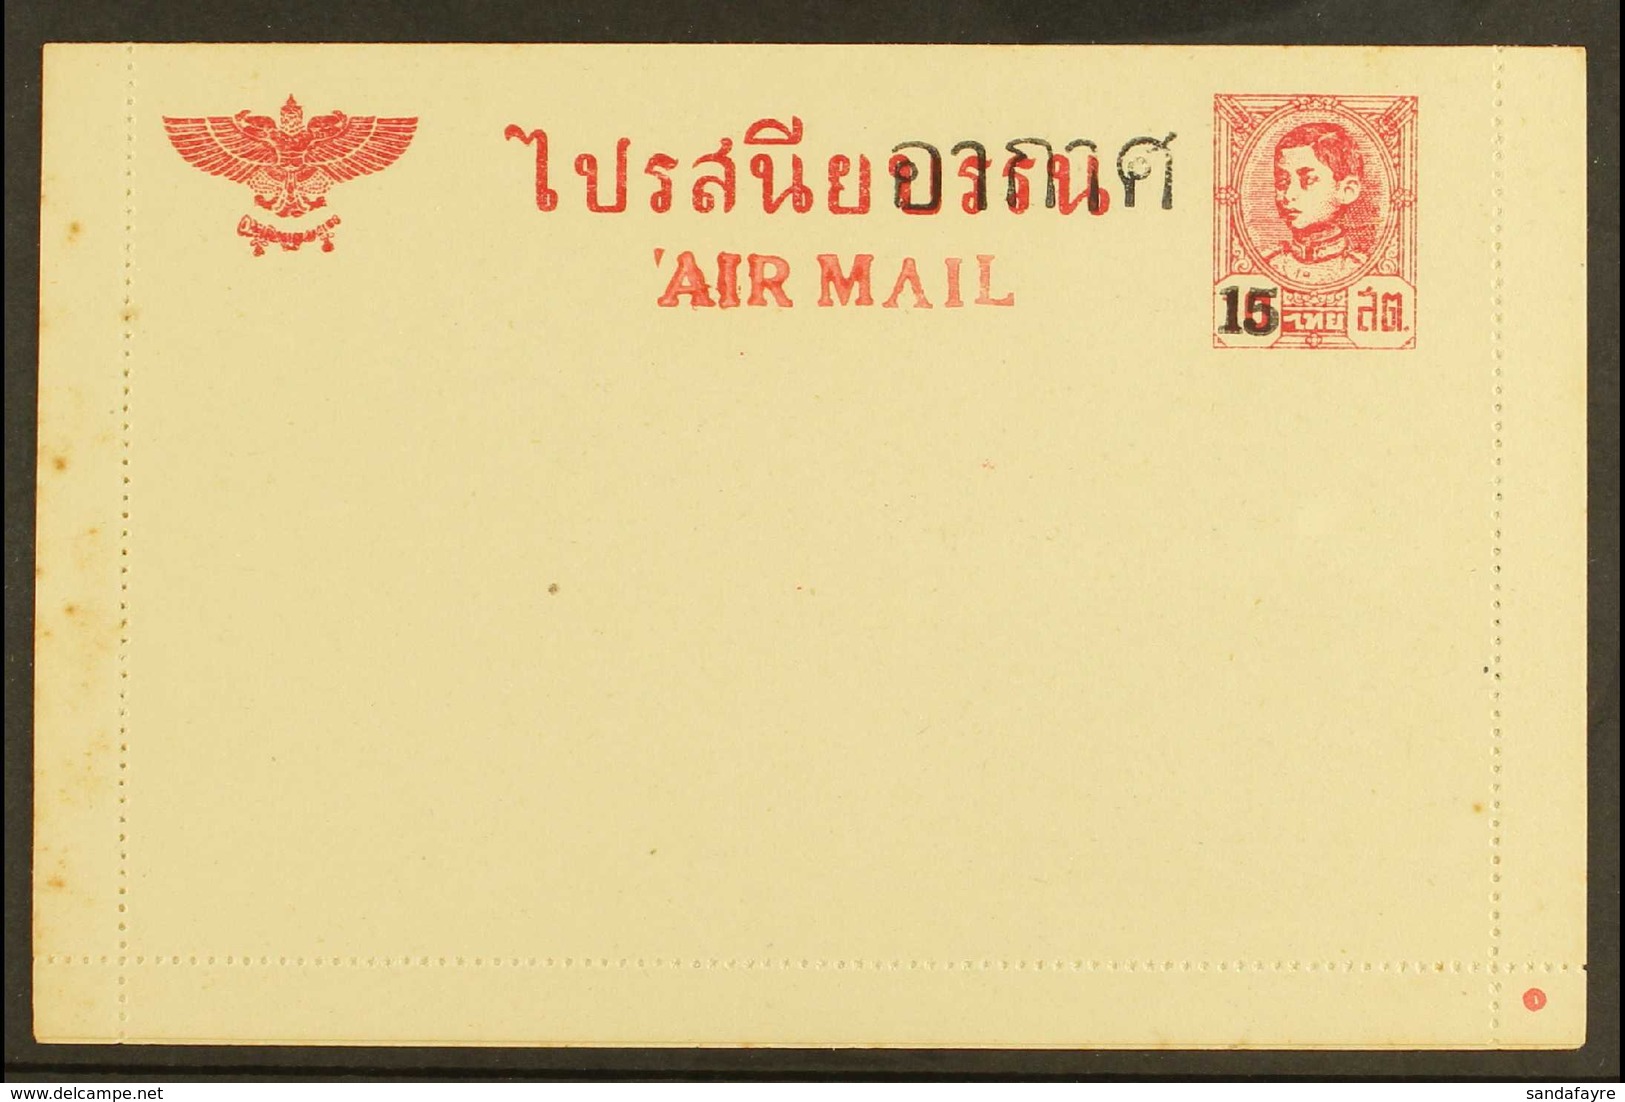 1948 (circa)  UNISSUED AIR MAIL LETTER CARD. 1943 10stg Carmine Letter Card With Additional "Air Mail" Inscription & 15s - Thailand